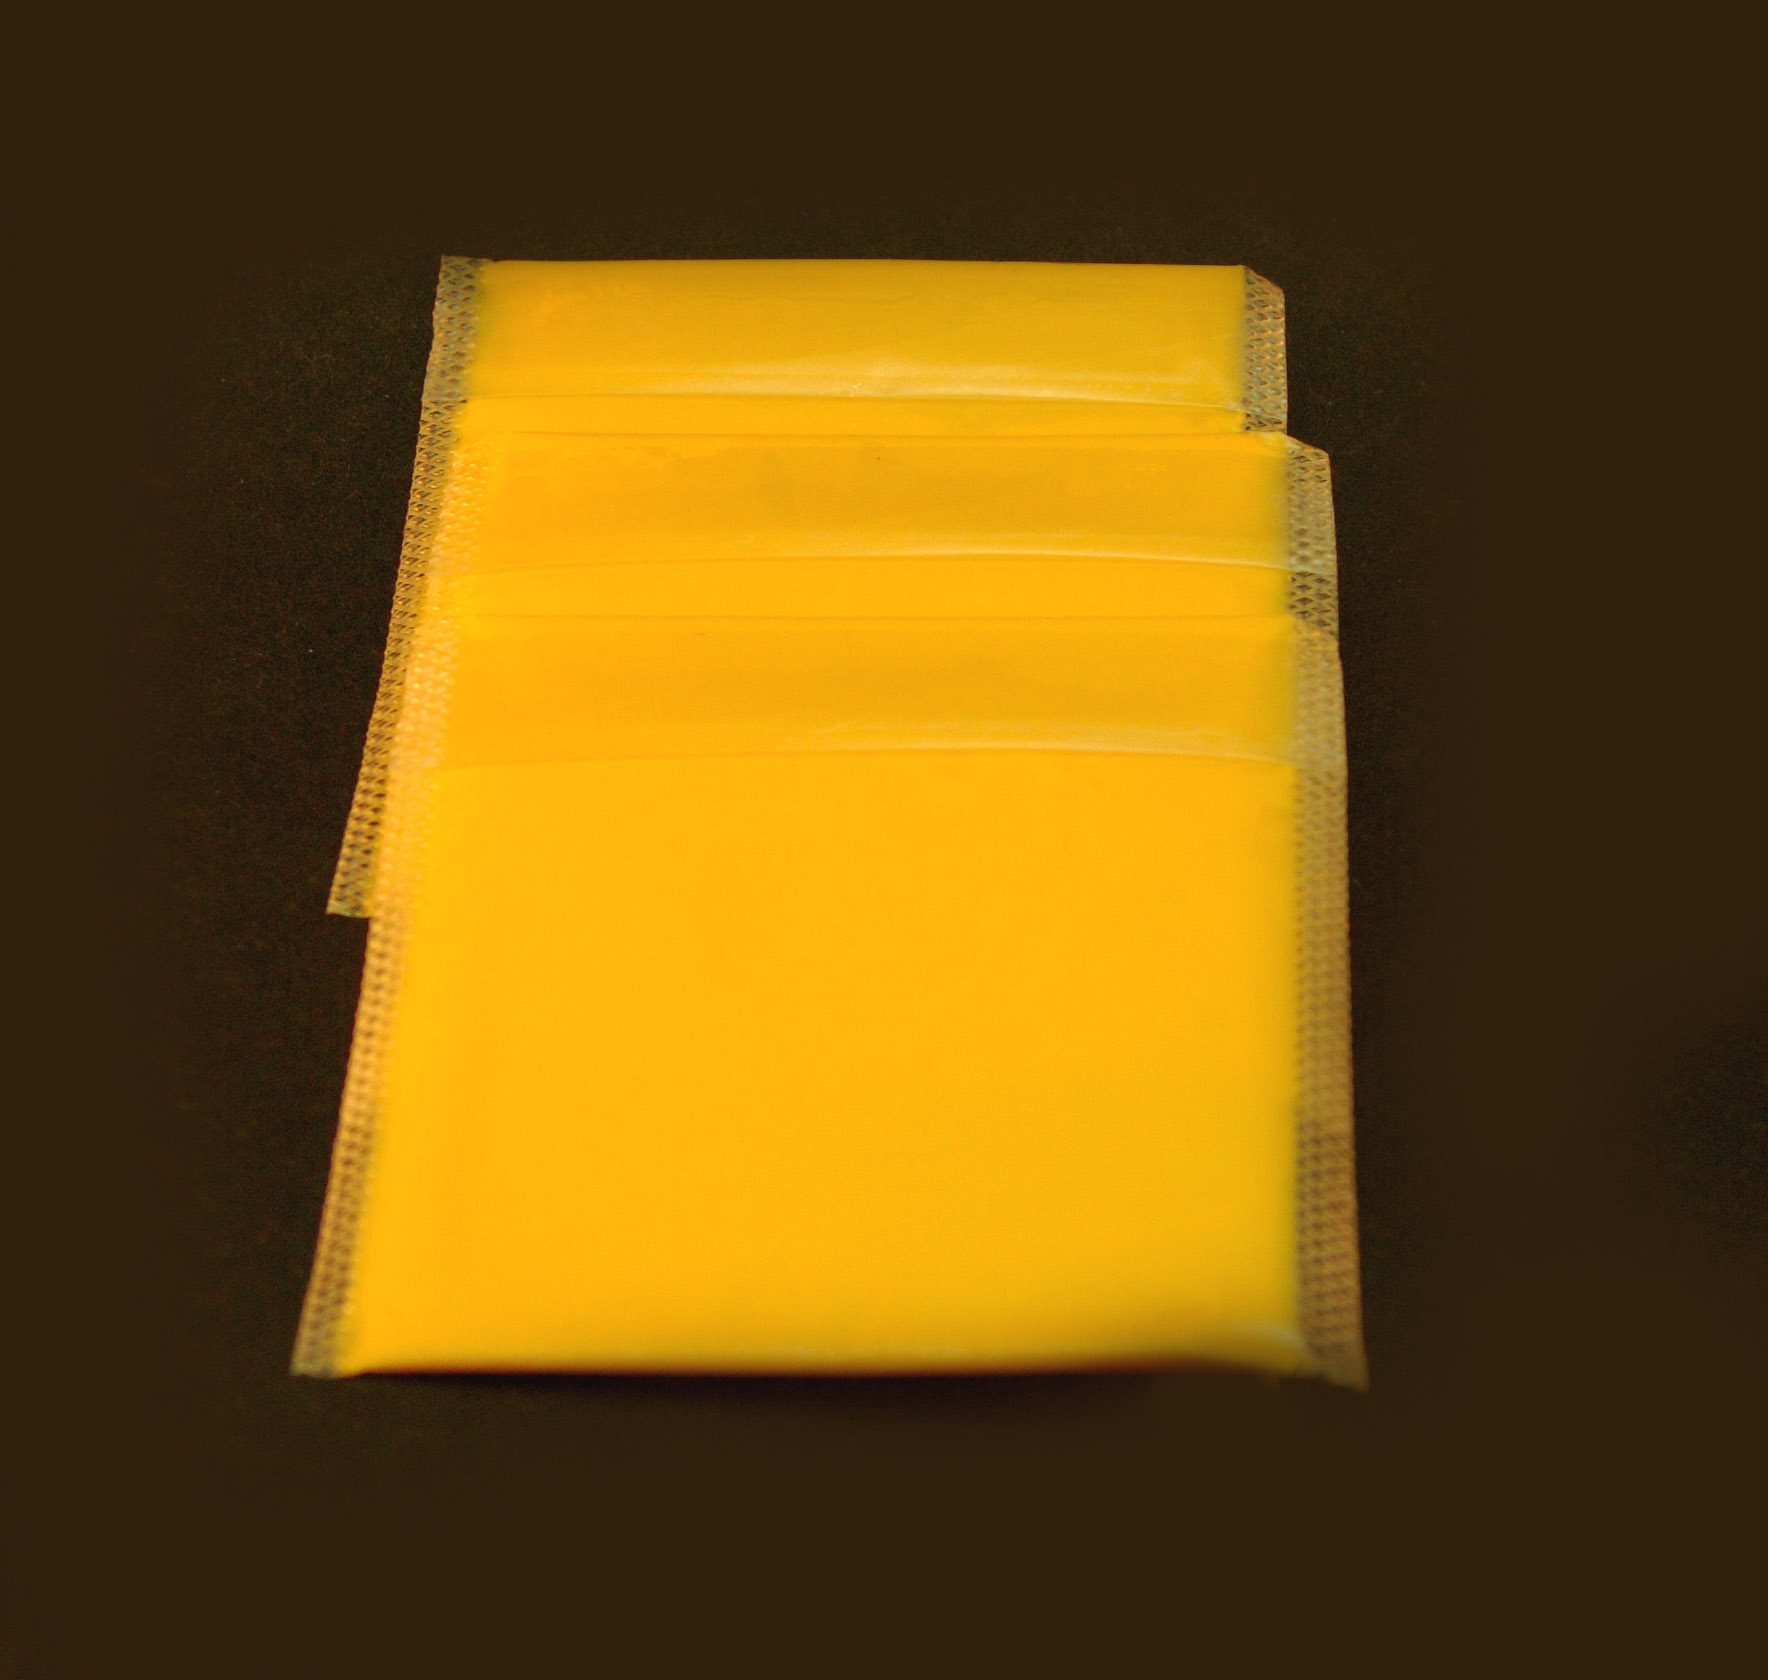 upload.wikimedia.org_wikipedia_commons_d_d0_Wrapped_American_cheese_slices.jpg